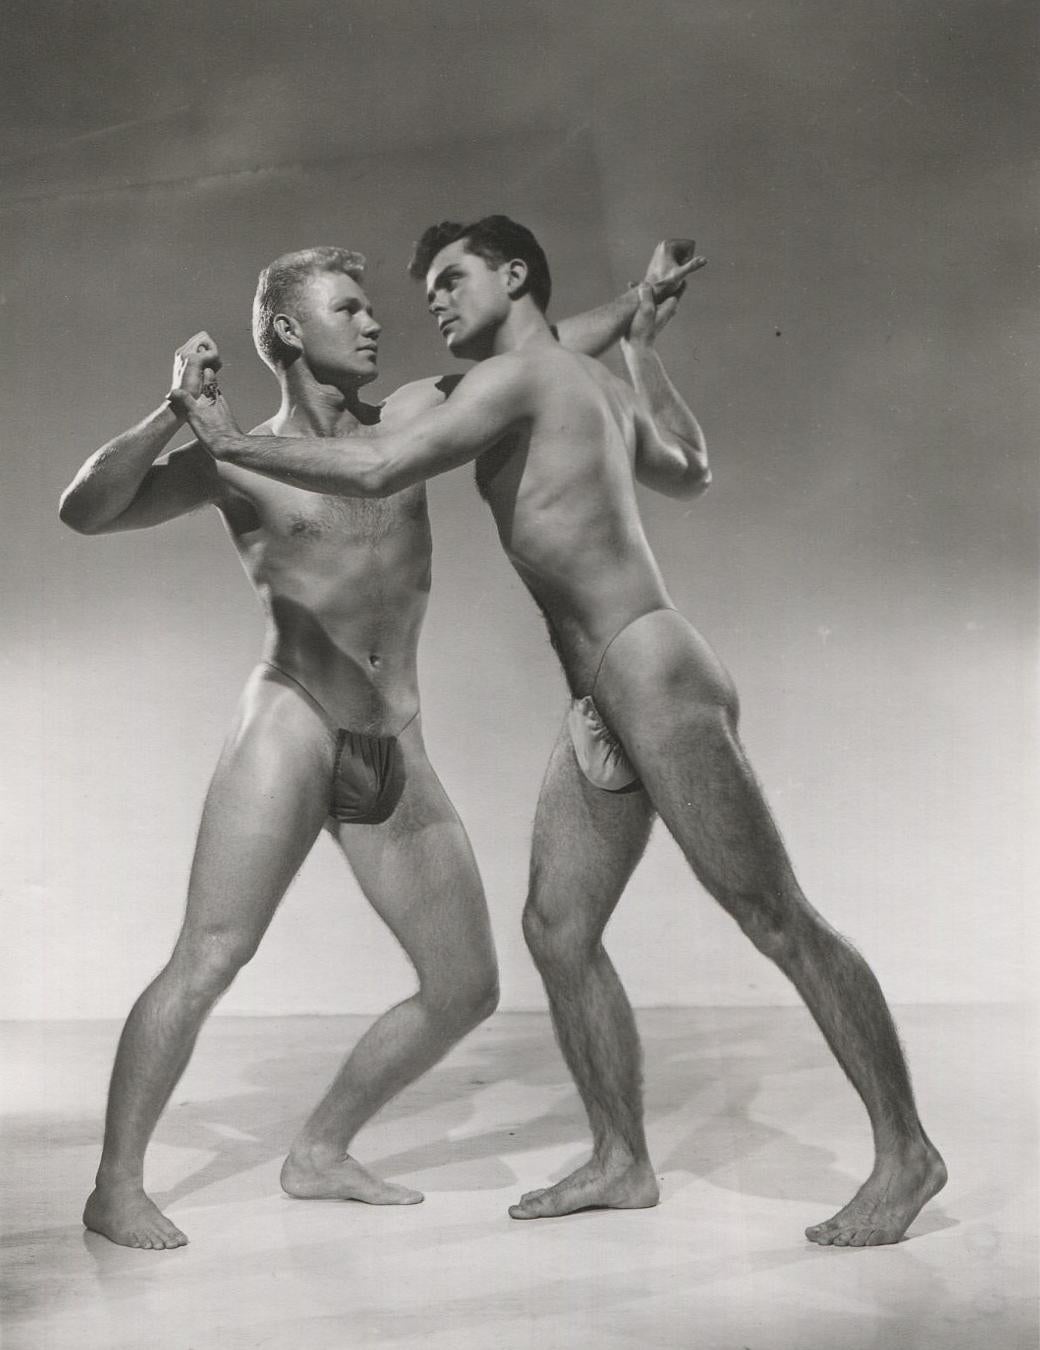 Untitled (Two Wrestlers) - Photograph by Bob Mizer